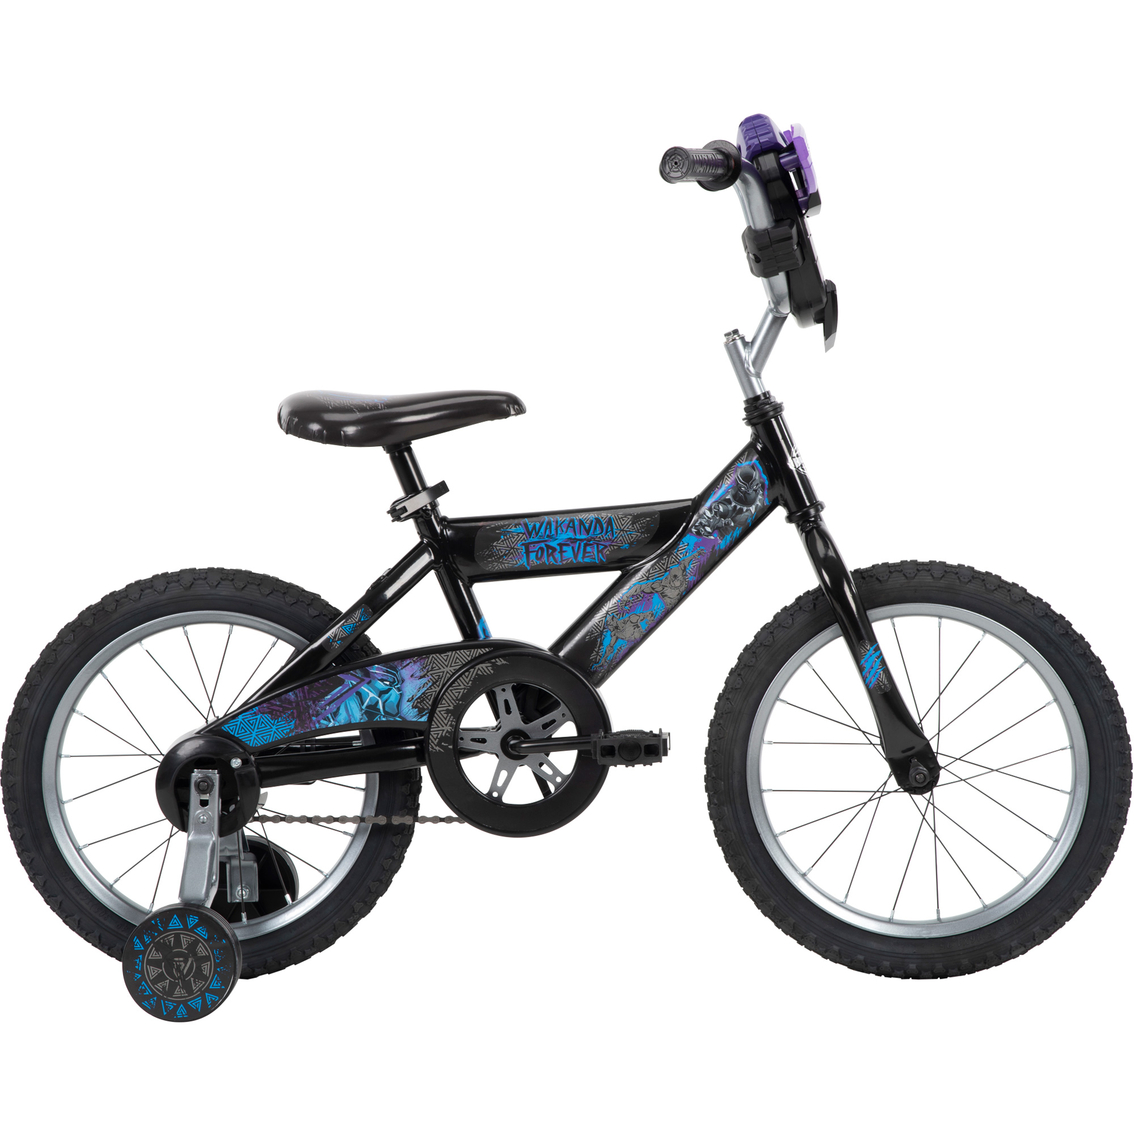 Huffy 16 in. Marvel Black Panther Bike - Image 2 of 6